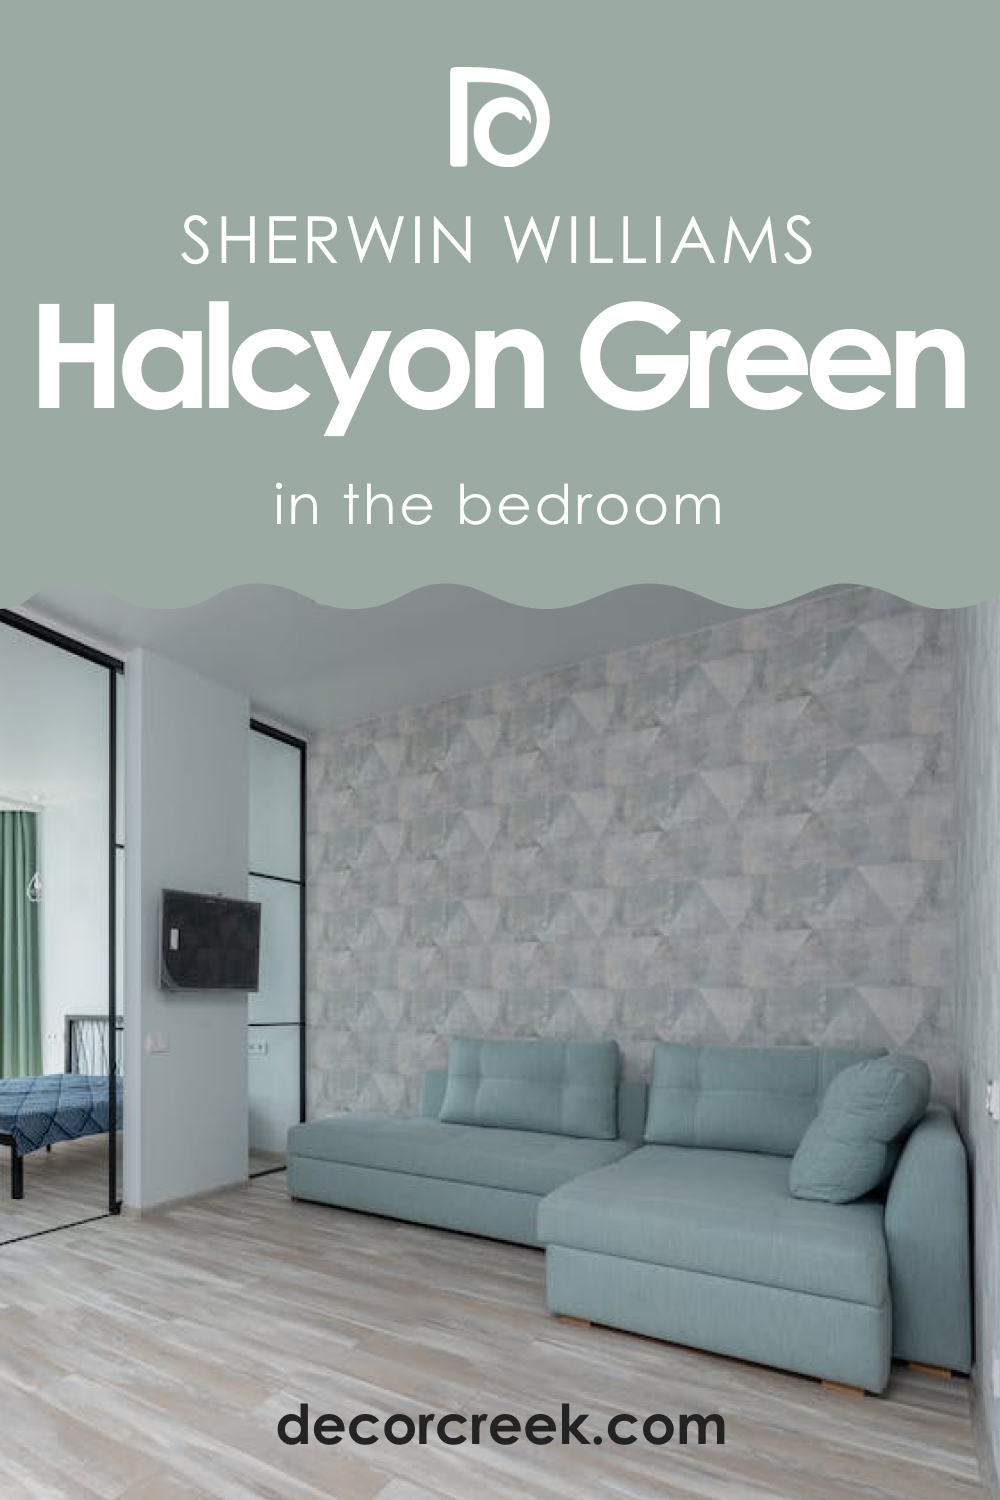 Halcyon Green SW-6213 in a Bedroom